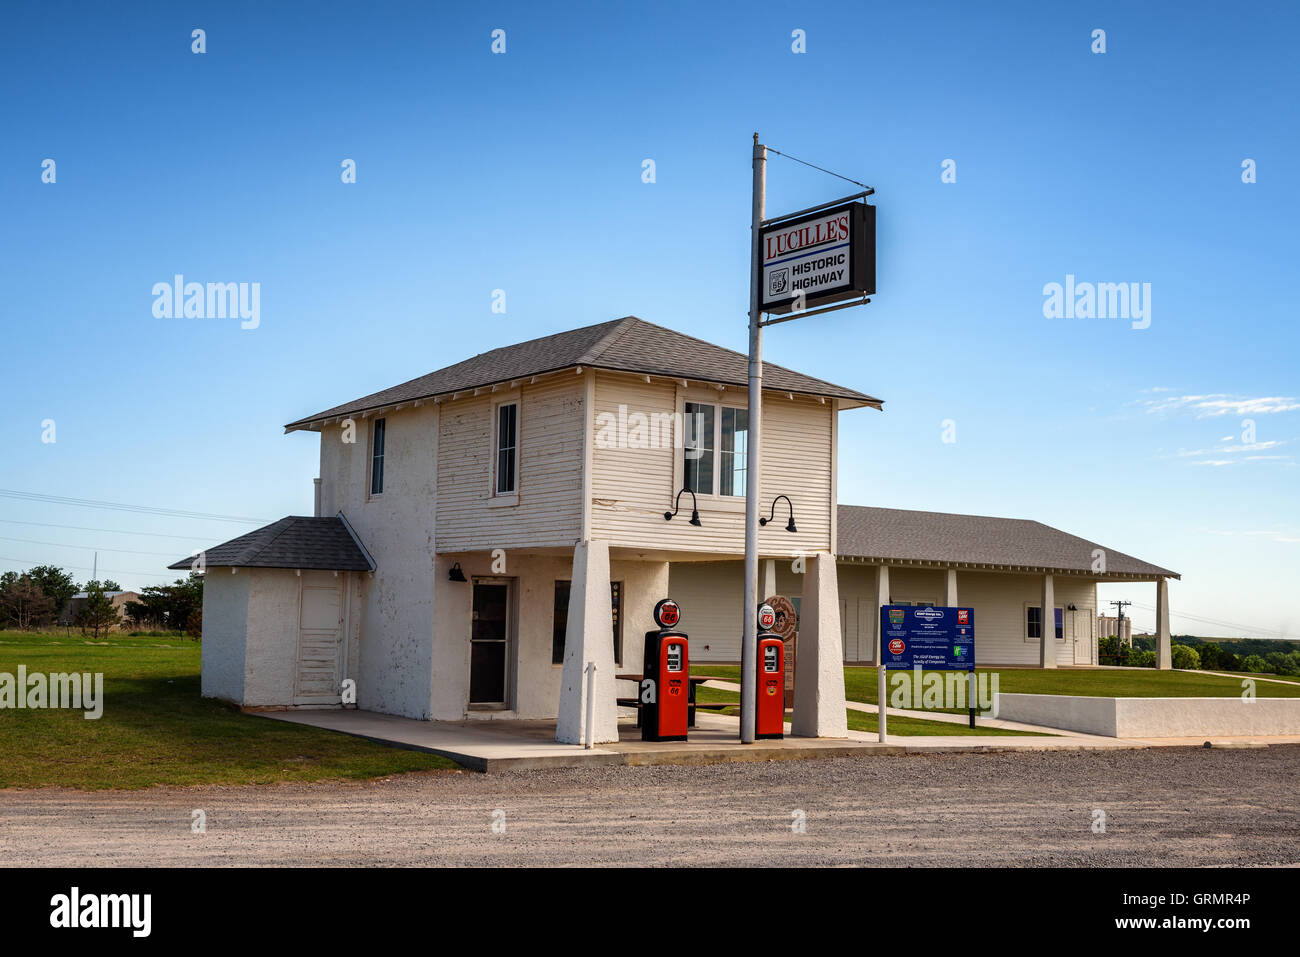 Lucille's Service Station, a classic and historic gas station along Route 66 near Hydro, Oklahoma. Stock Photo